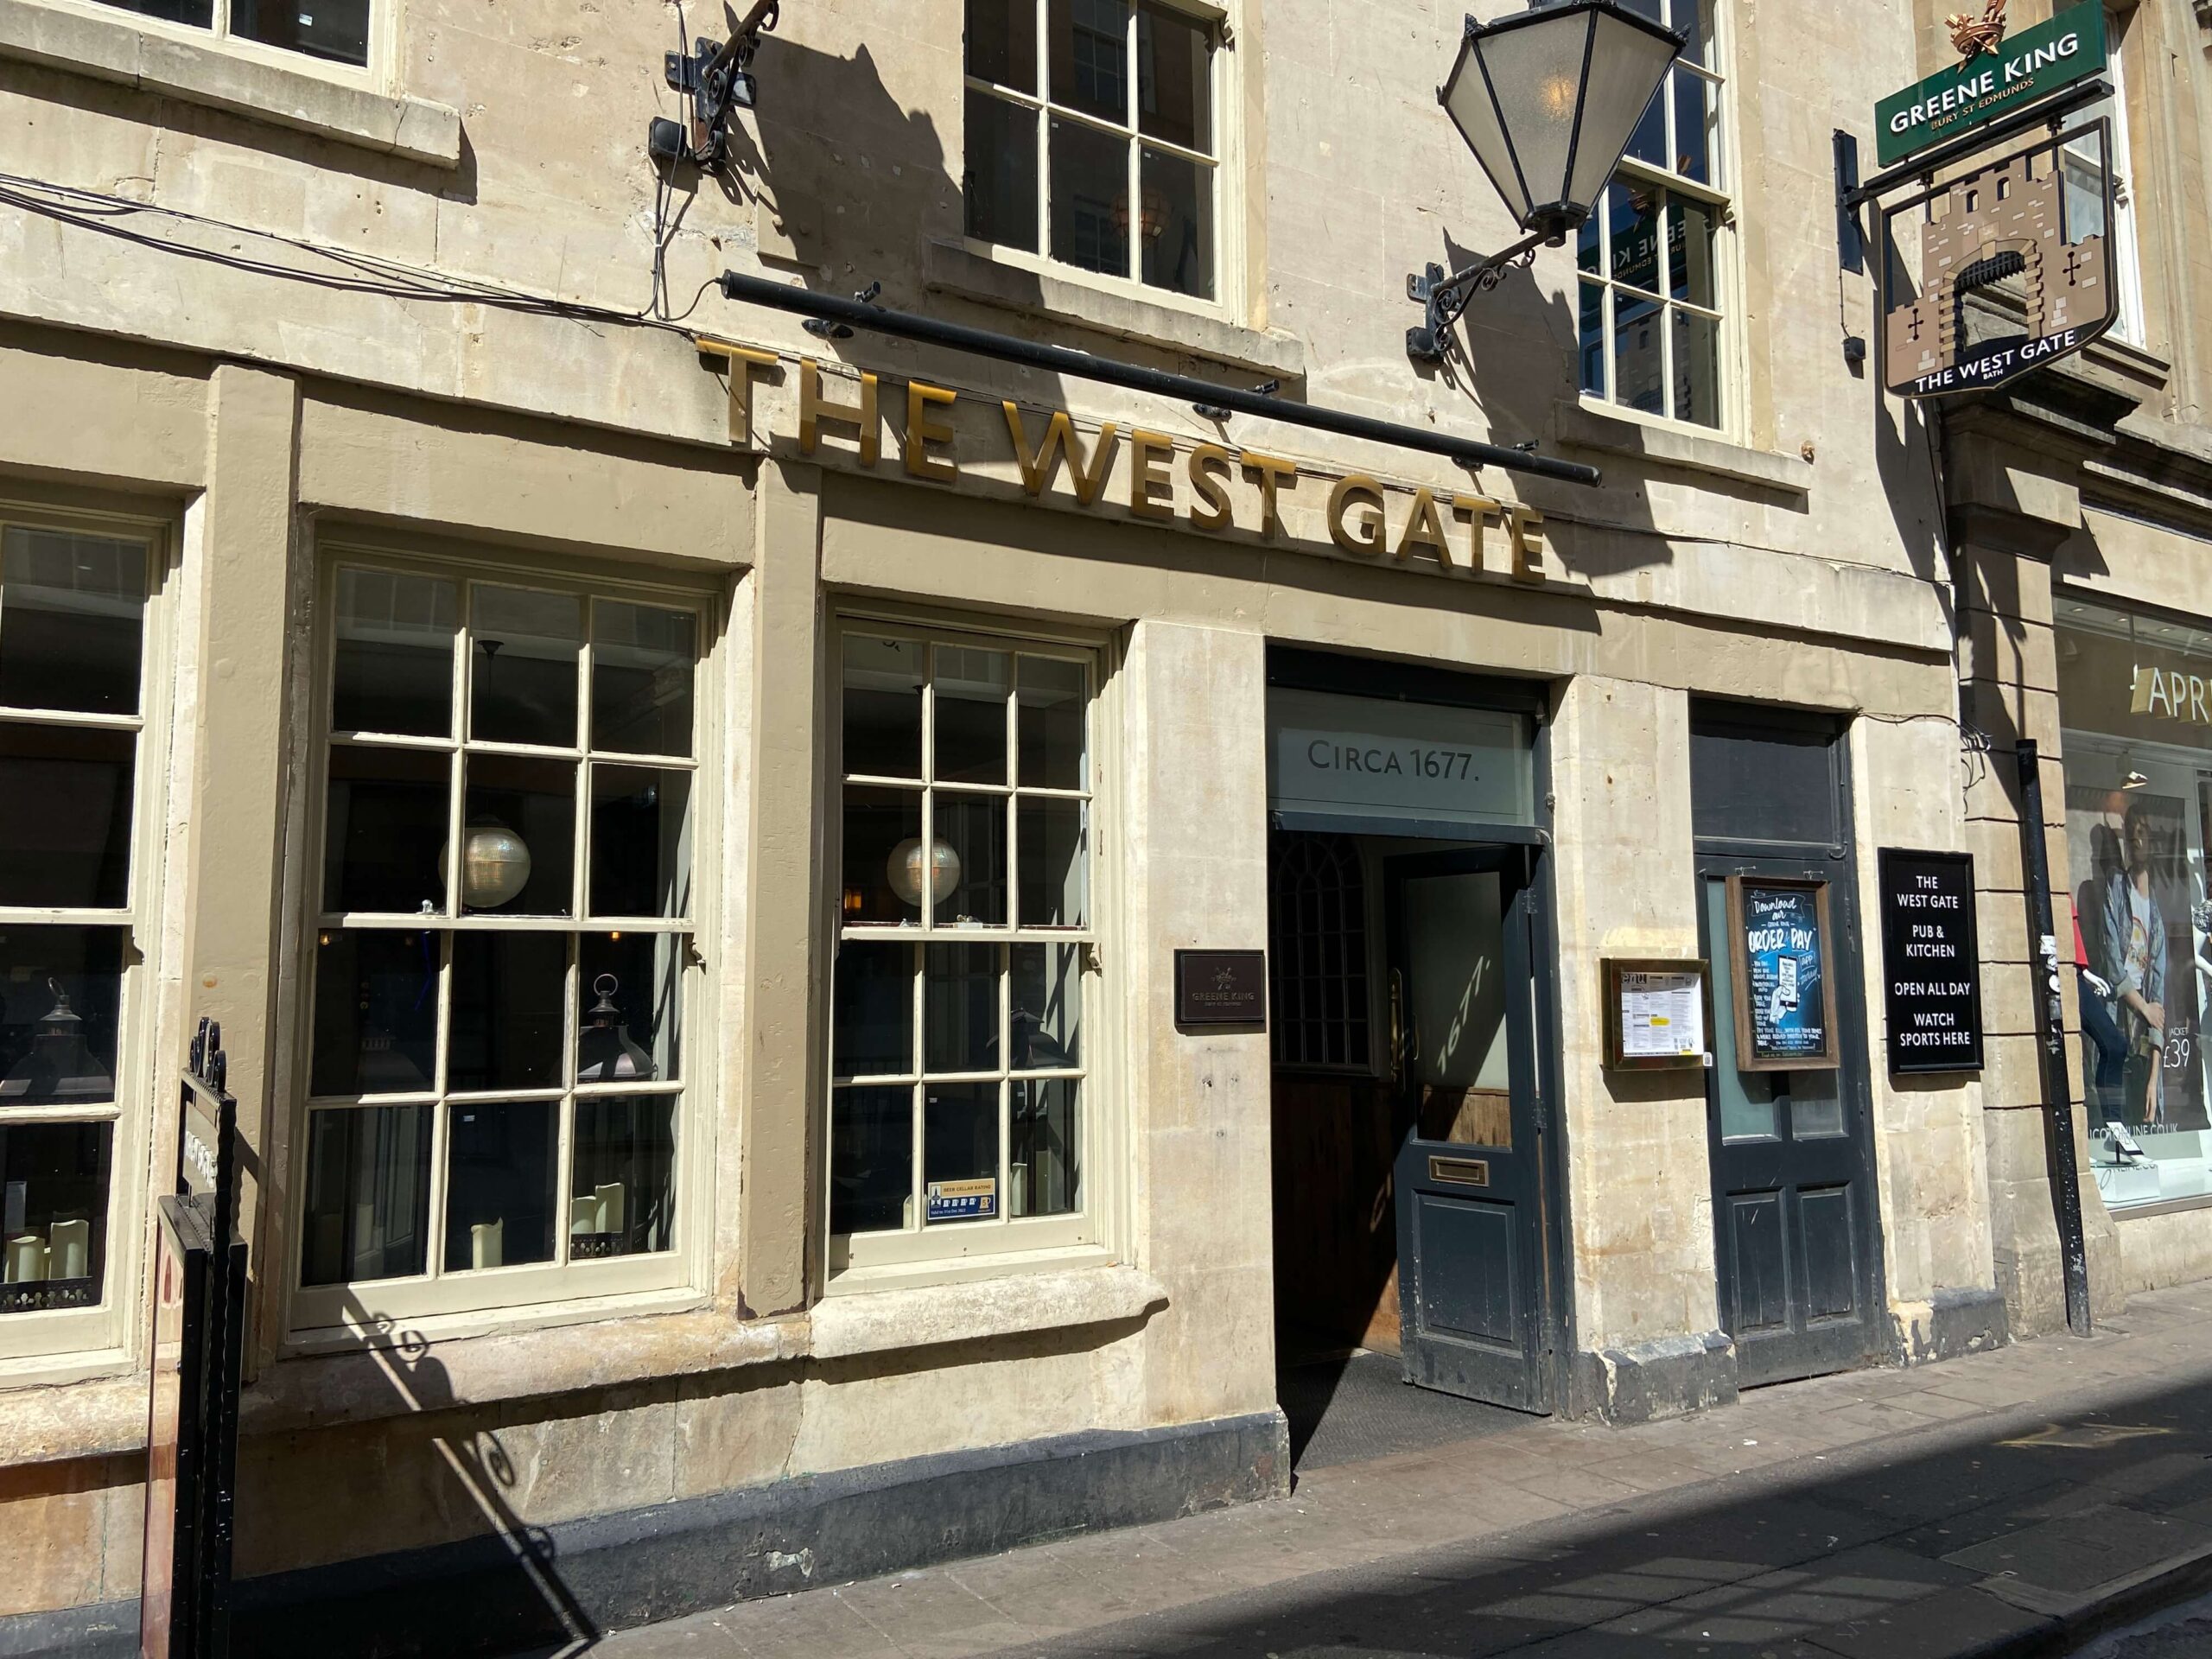 Image of the West Gate pub in bath from the Front